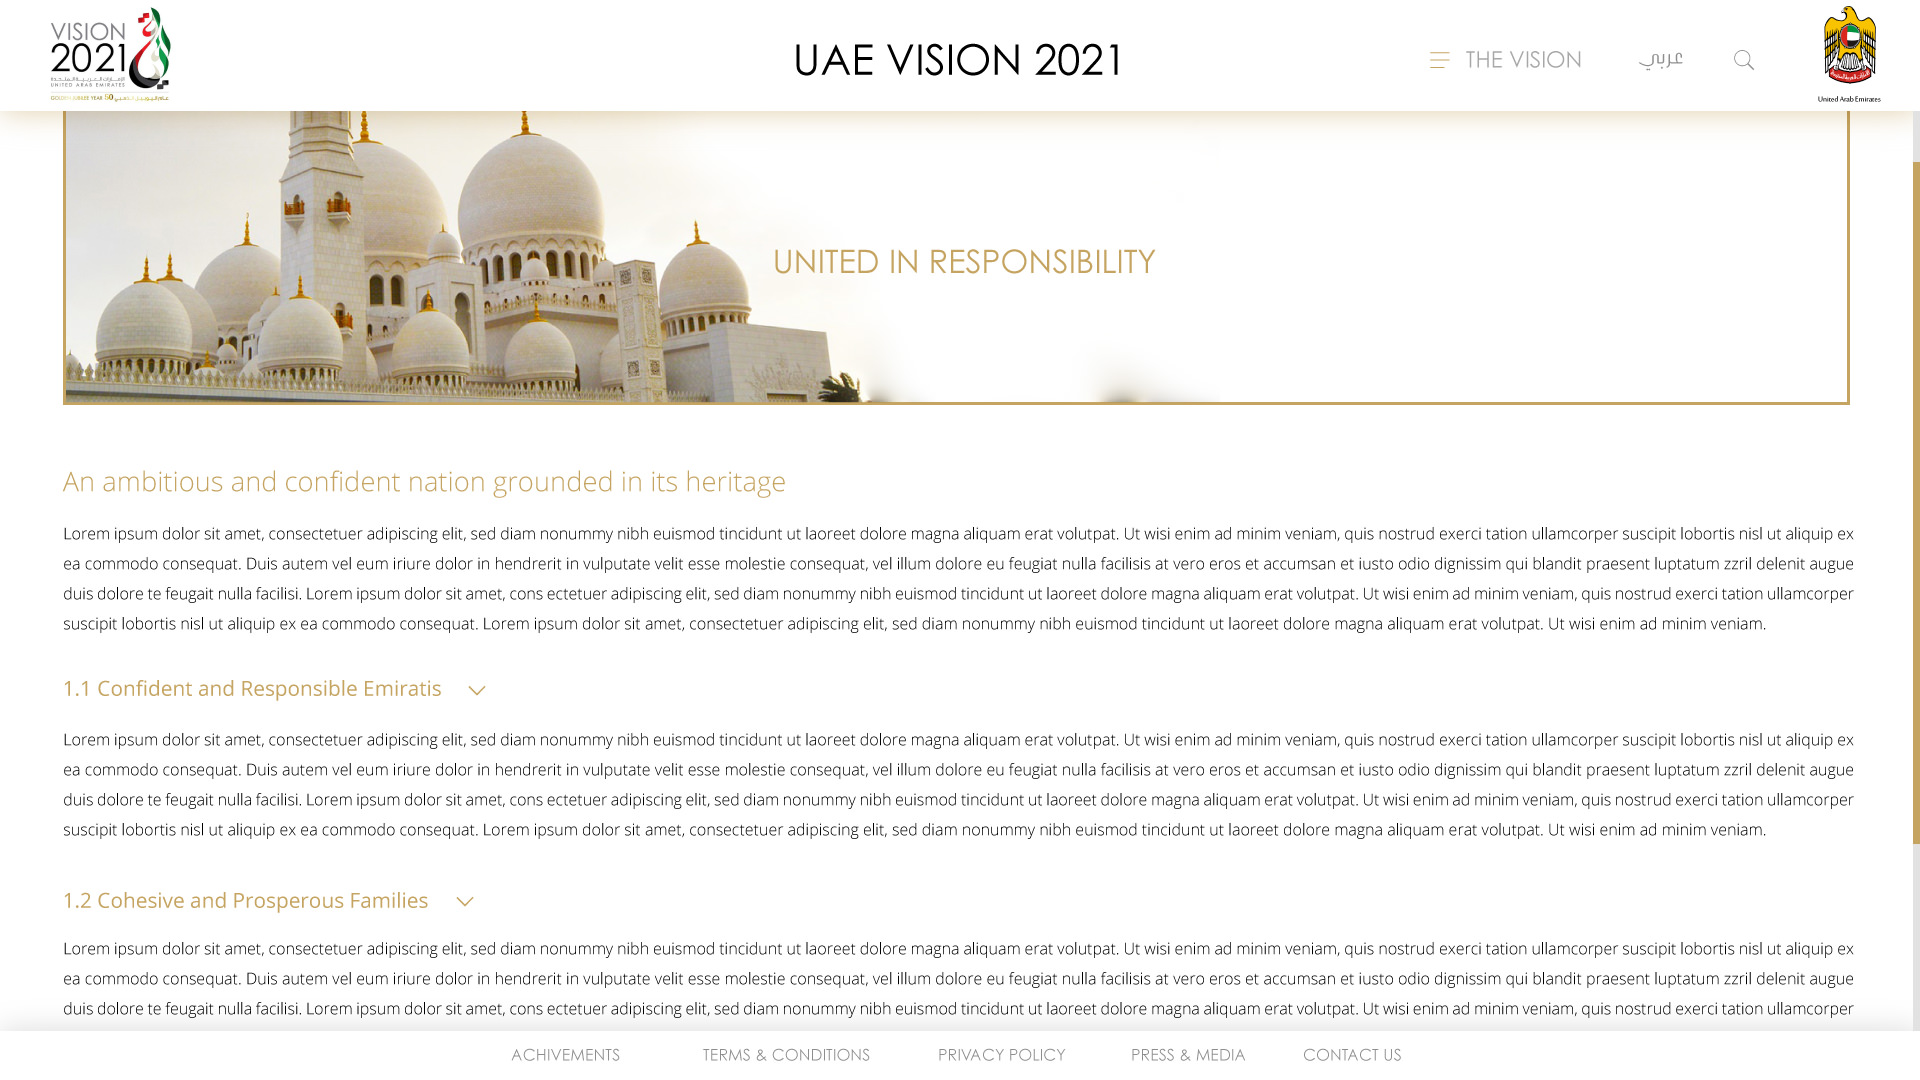 Content Page - UAE Vision 2021